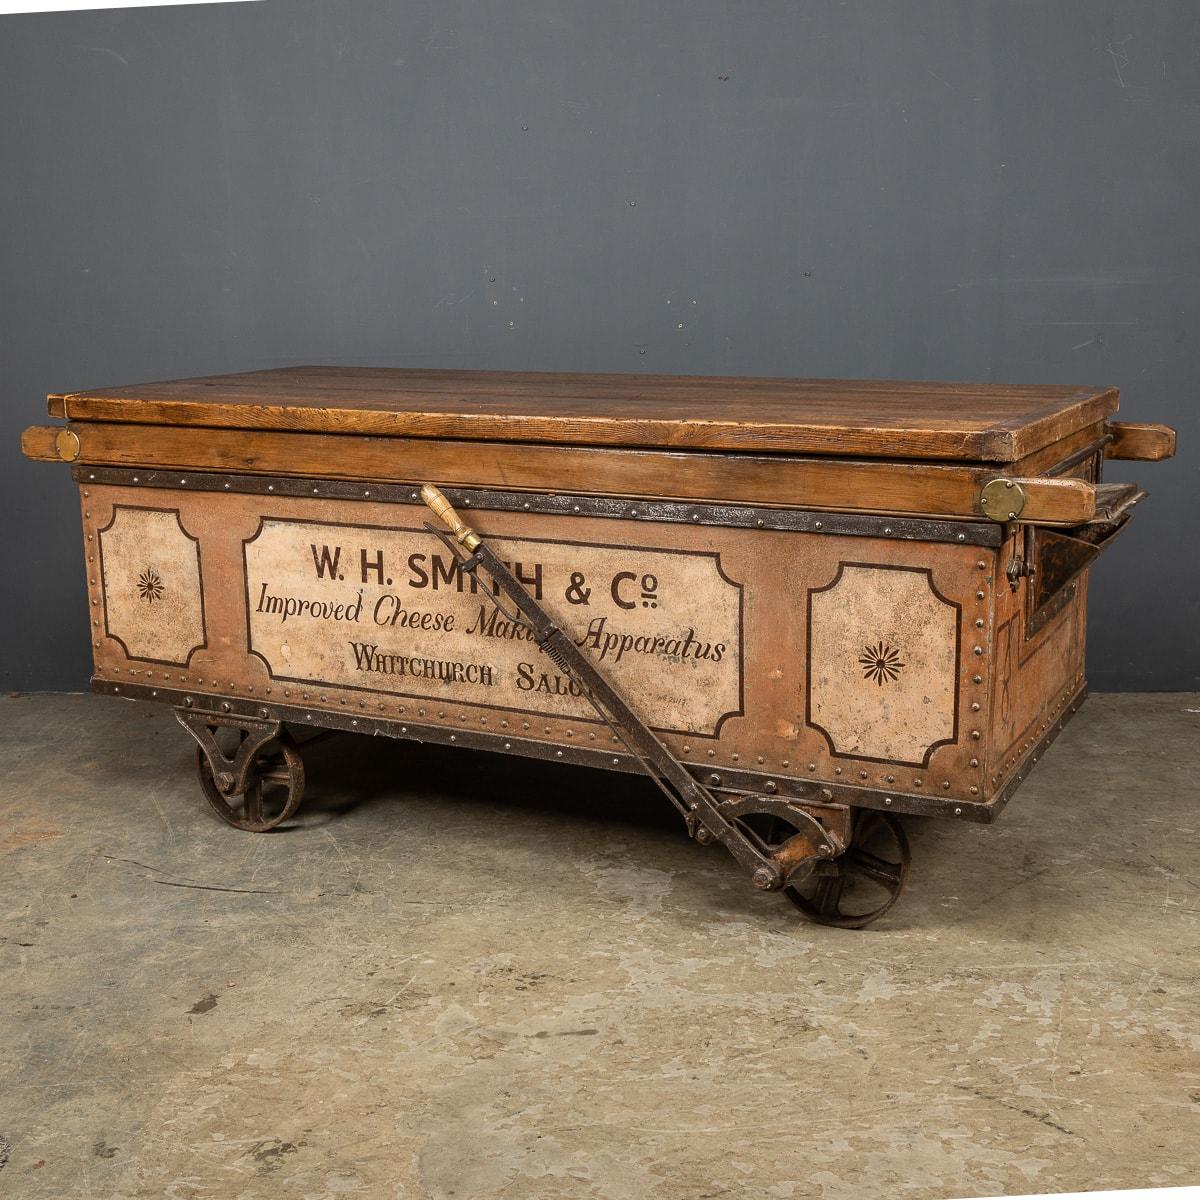 Antique 19th century Victorian freight truck used to transport feed to local dairies, this metal carriage has a solid oak top, original wheels and tilt lever, later sign written for a cheese maker.

Condition
In Great Condition, wear as expected